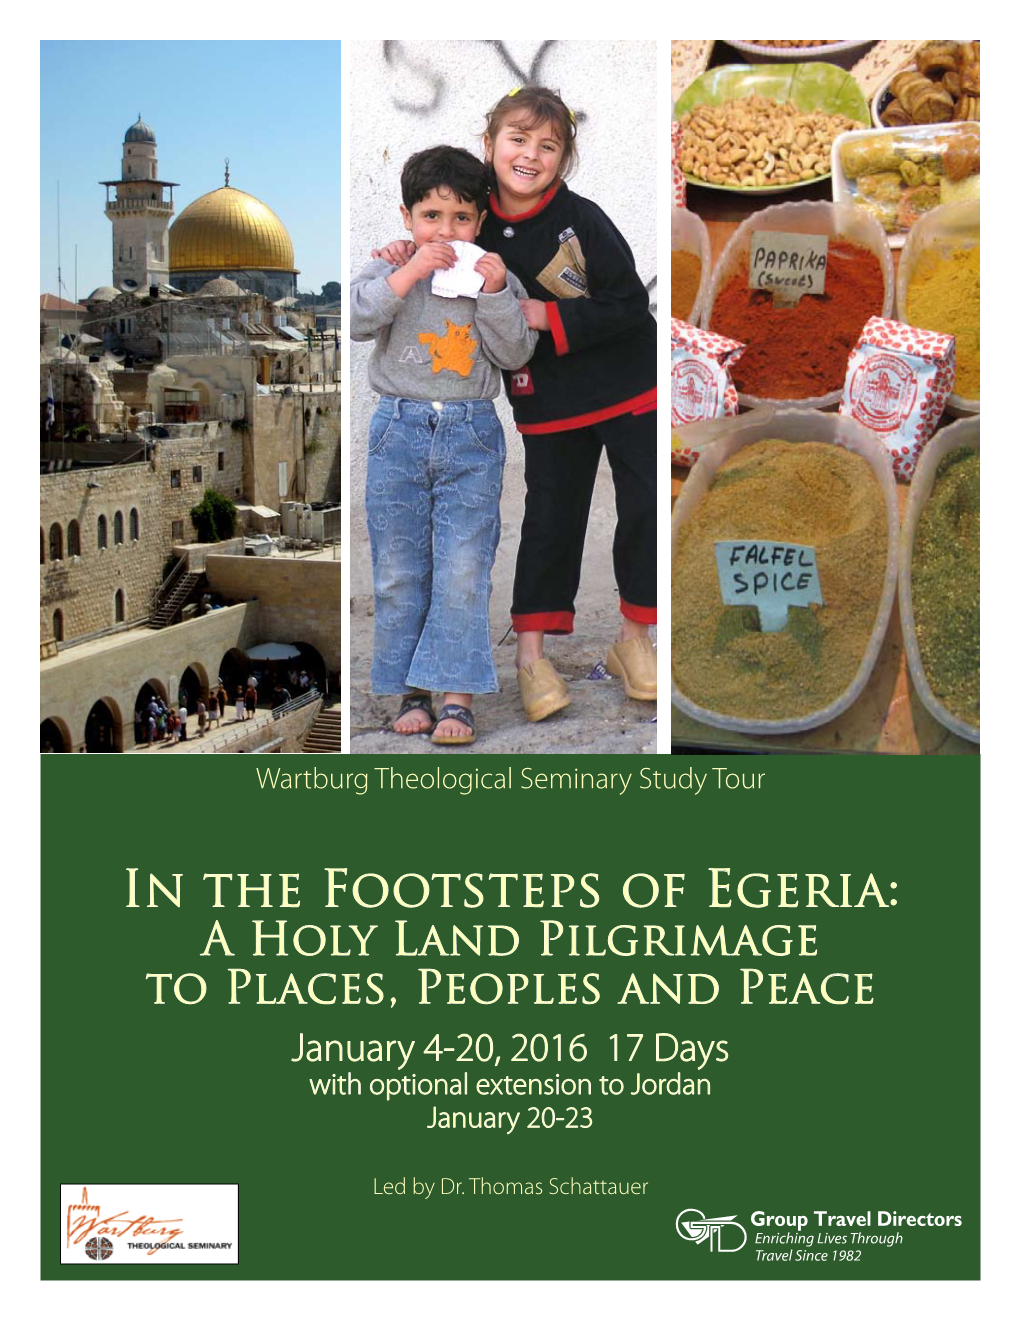 In the Footsteps of Egeria: a Holy Land Pilgrimage to Places, Peoples and Peace January 4-20, 2016 17 Days with Optional Extension to Jordan January 20-23